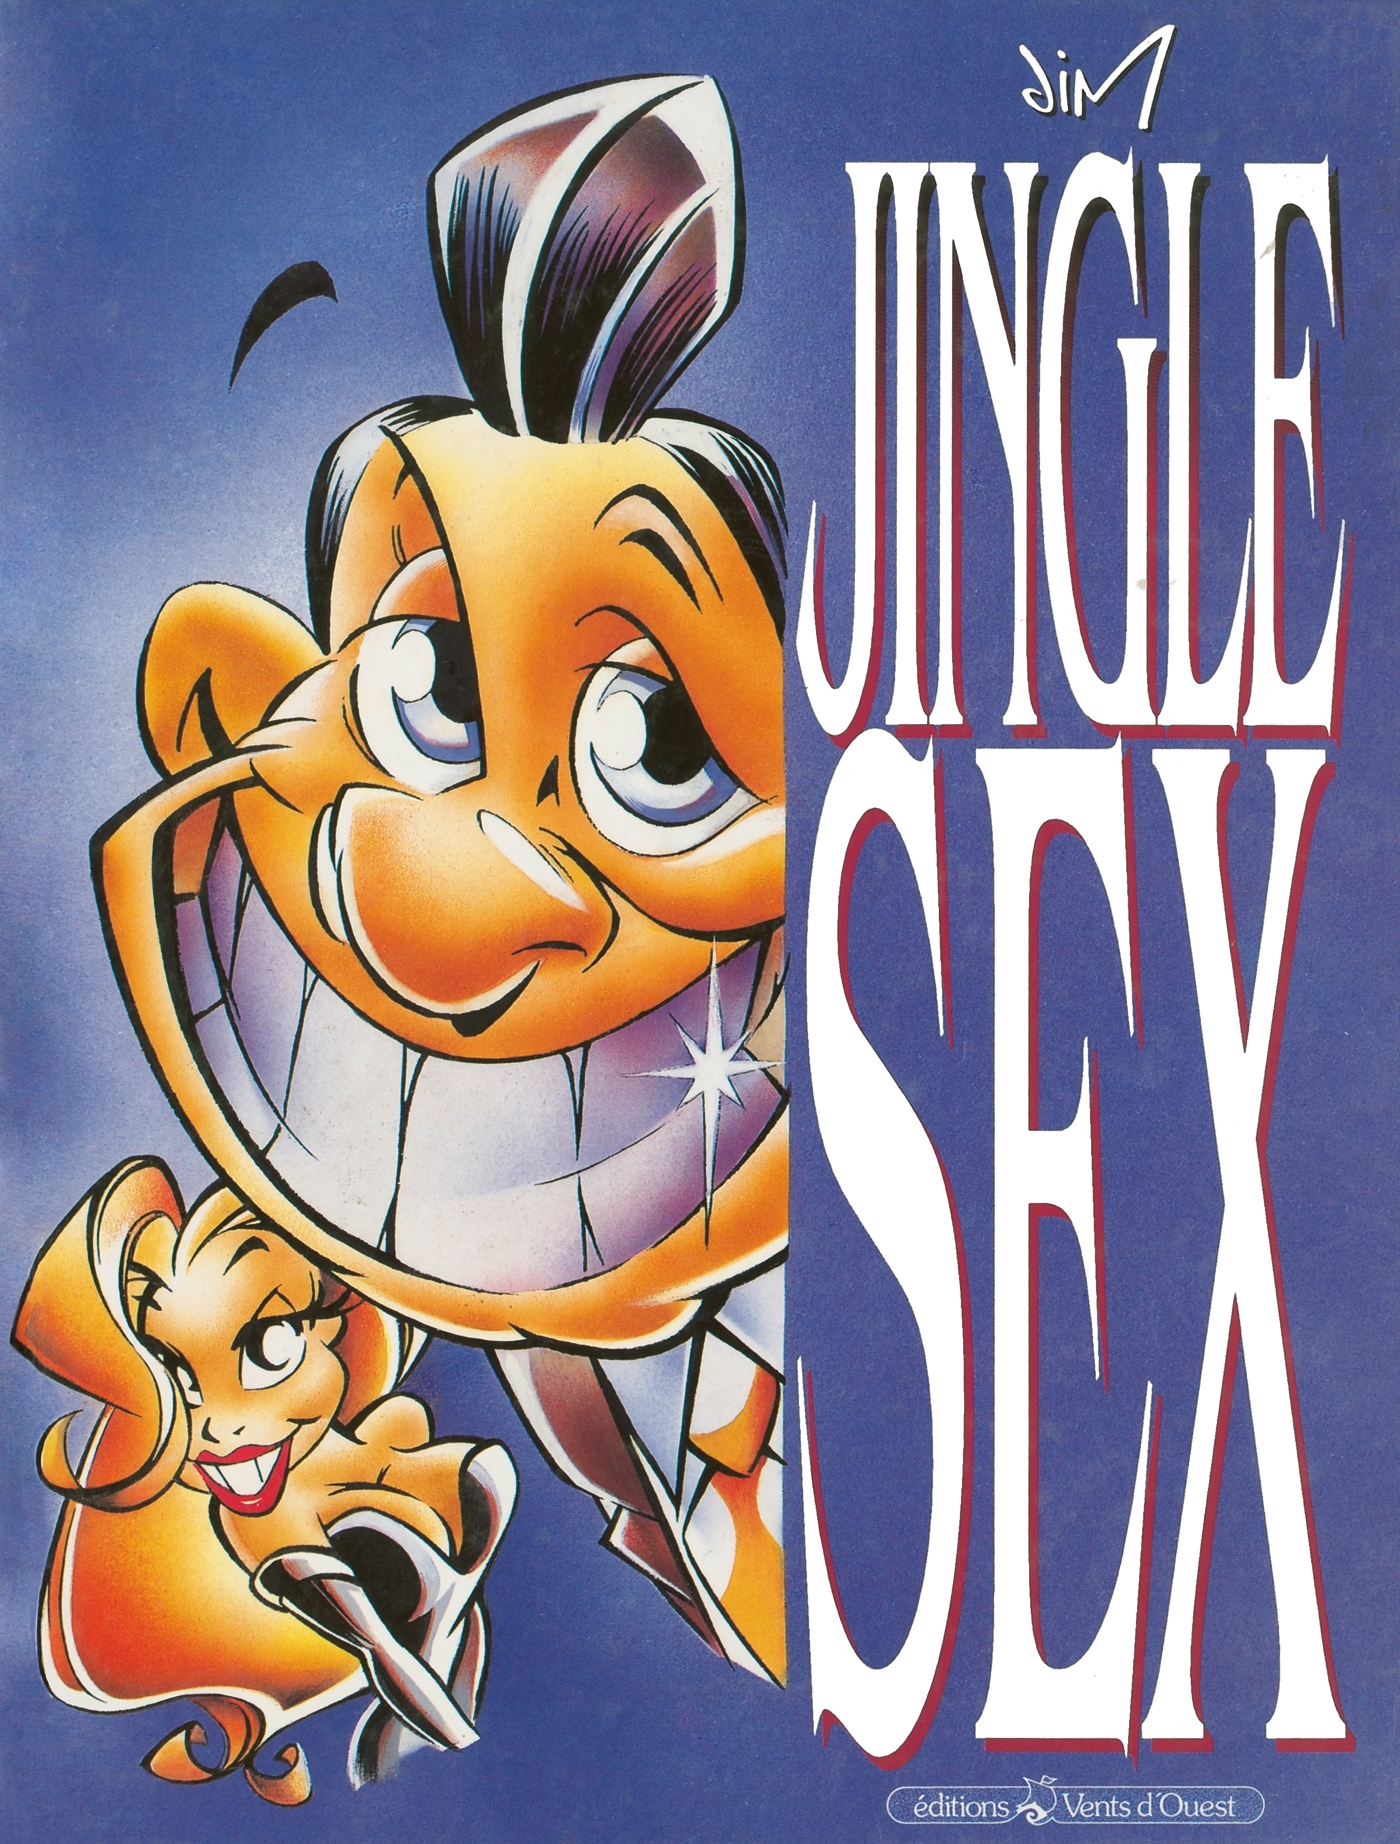 Jingle sex (9782869672567-front-cover)